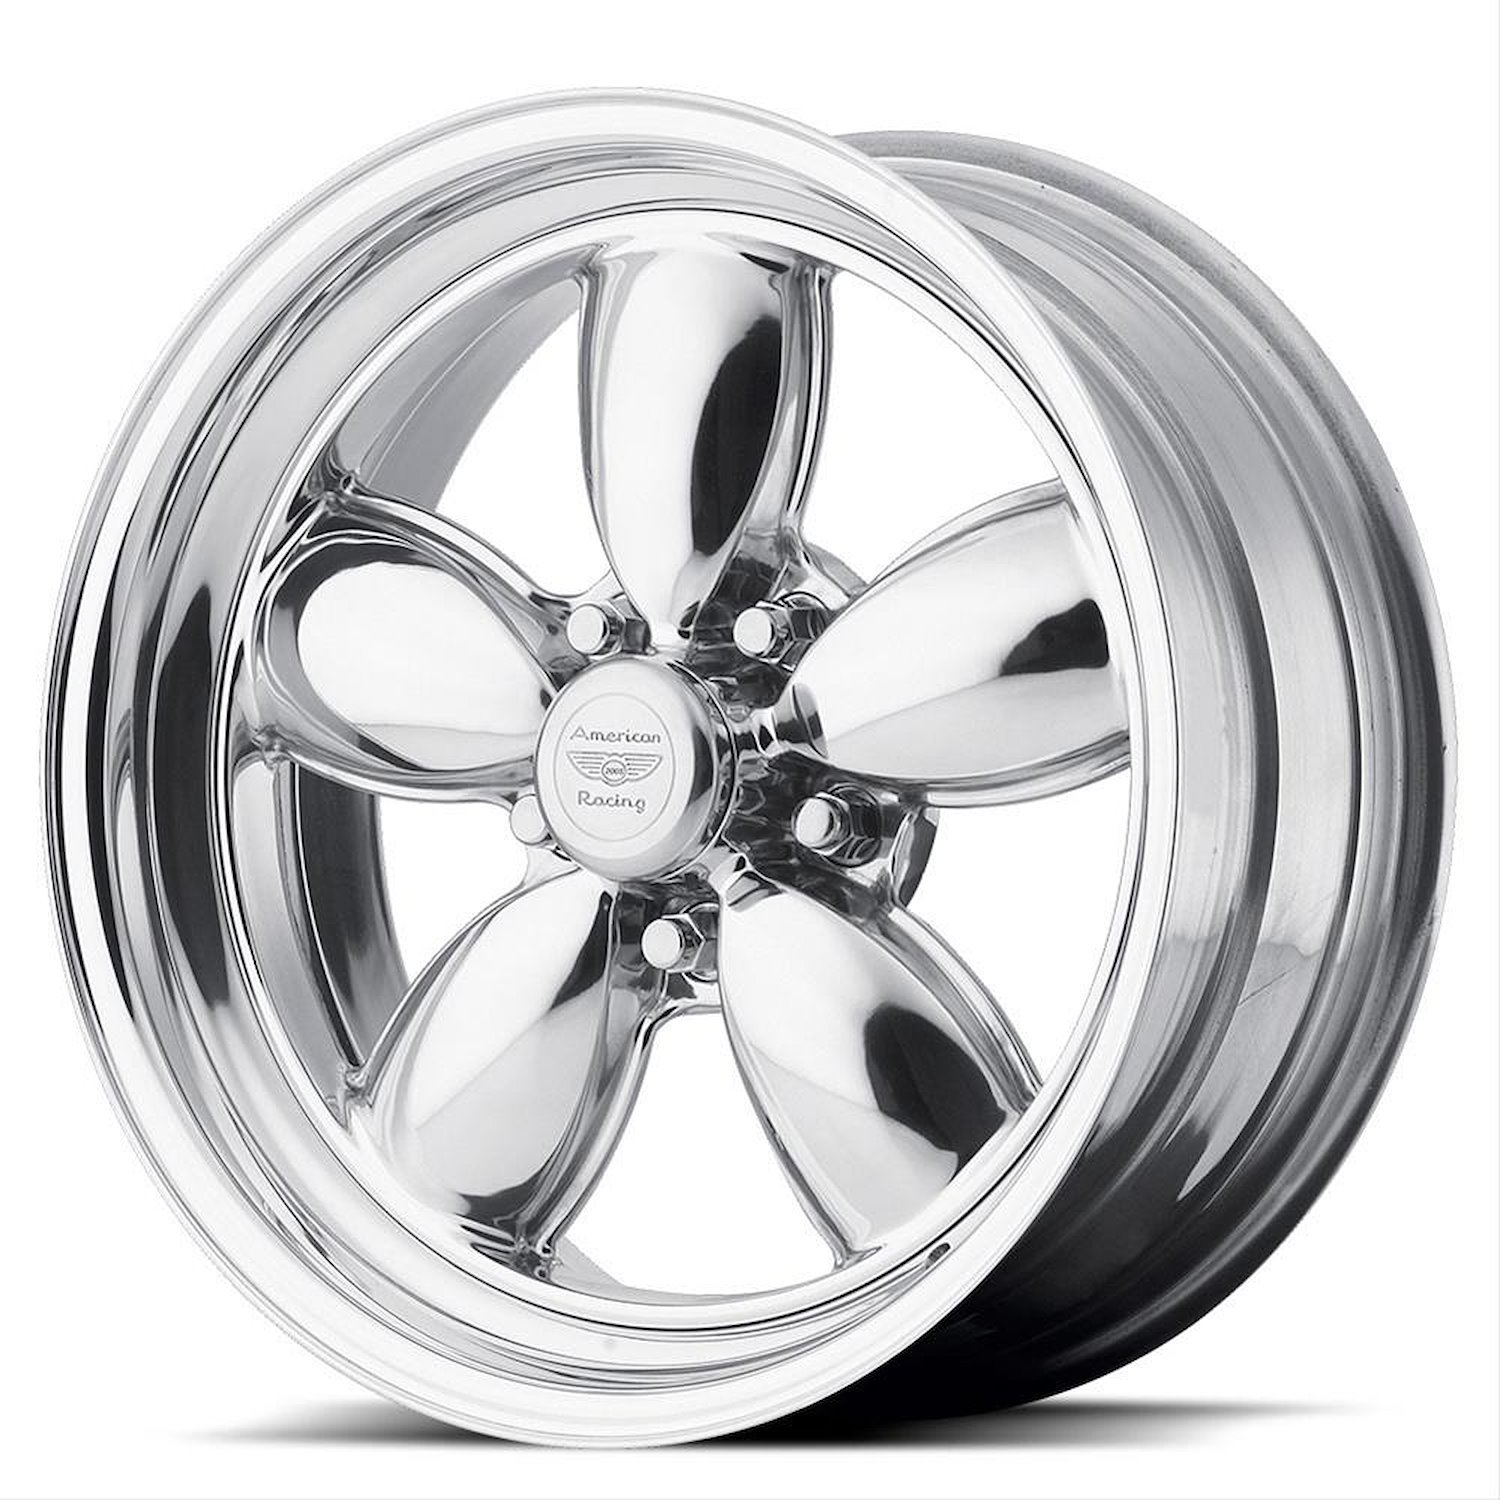 AMERICAN RACING CLASSIC 200S TWO-PIECE POLISHED 15 x 6 5x4.5 -6 3.26